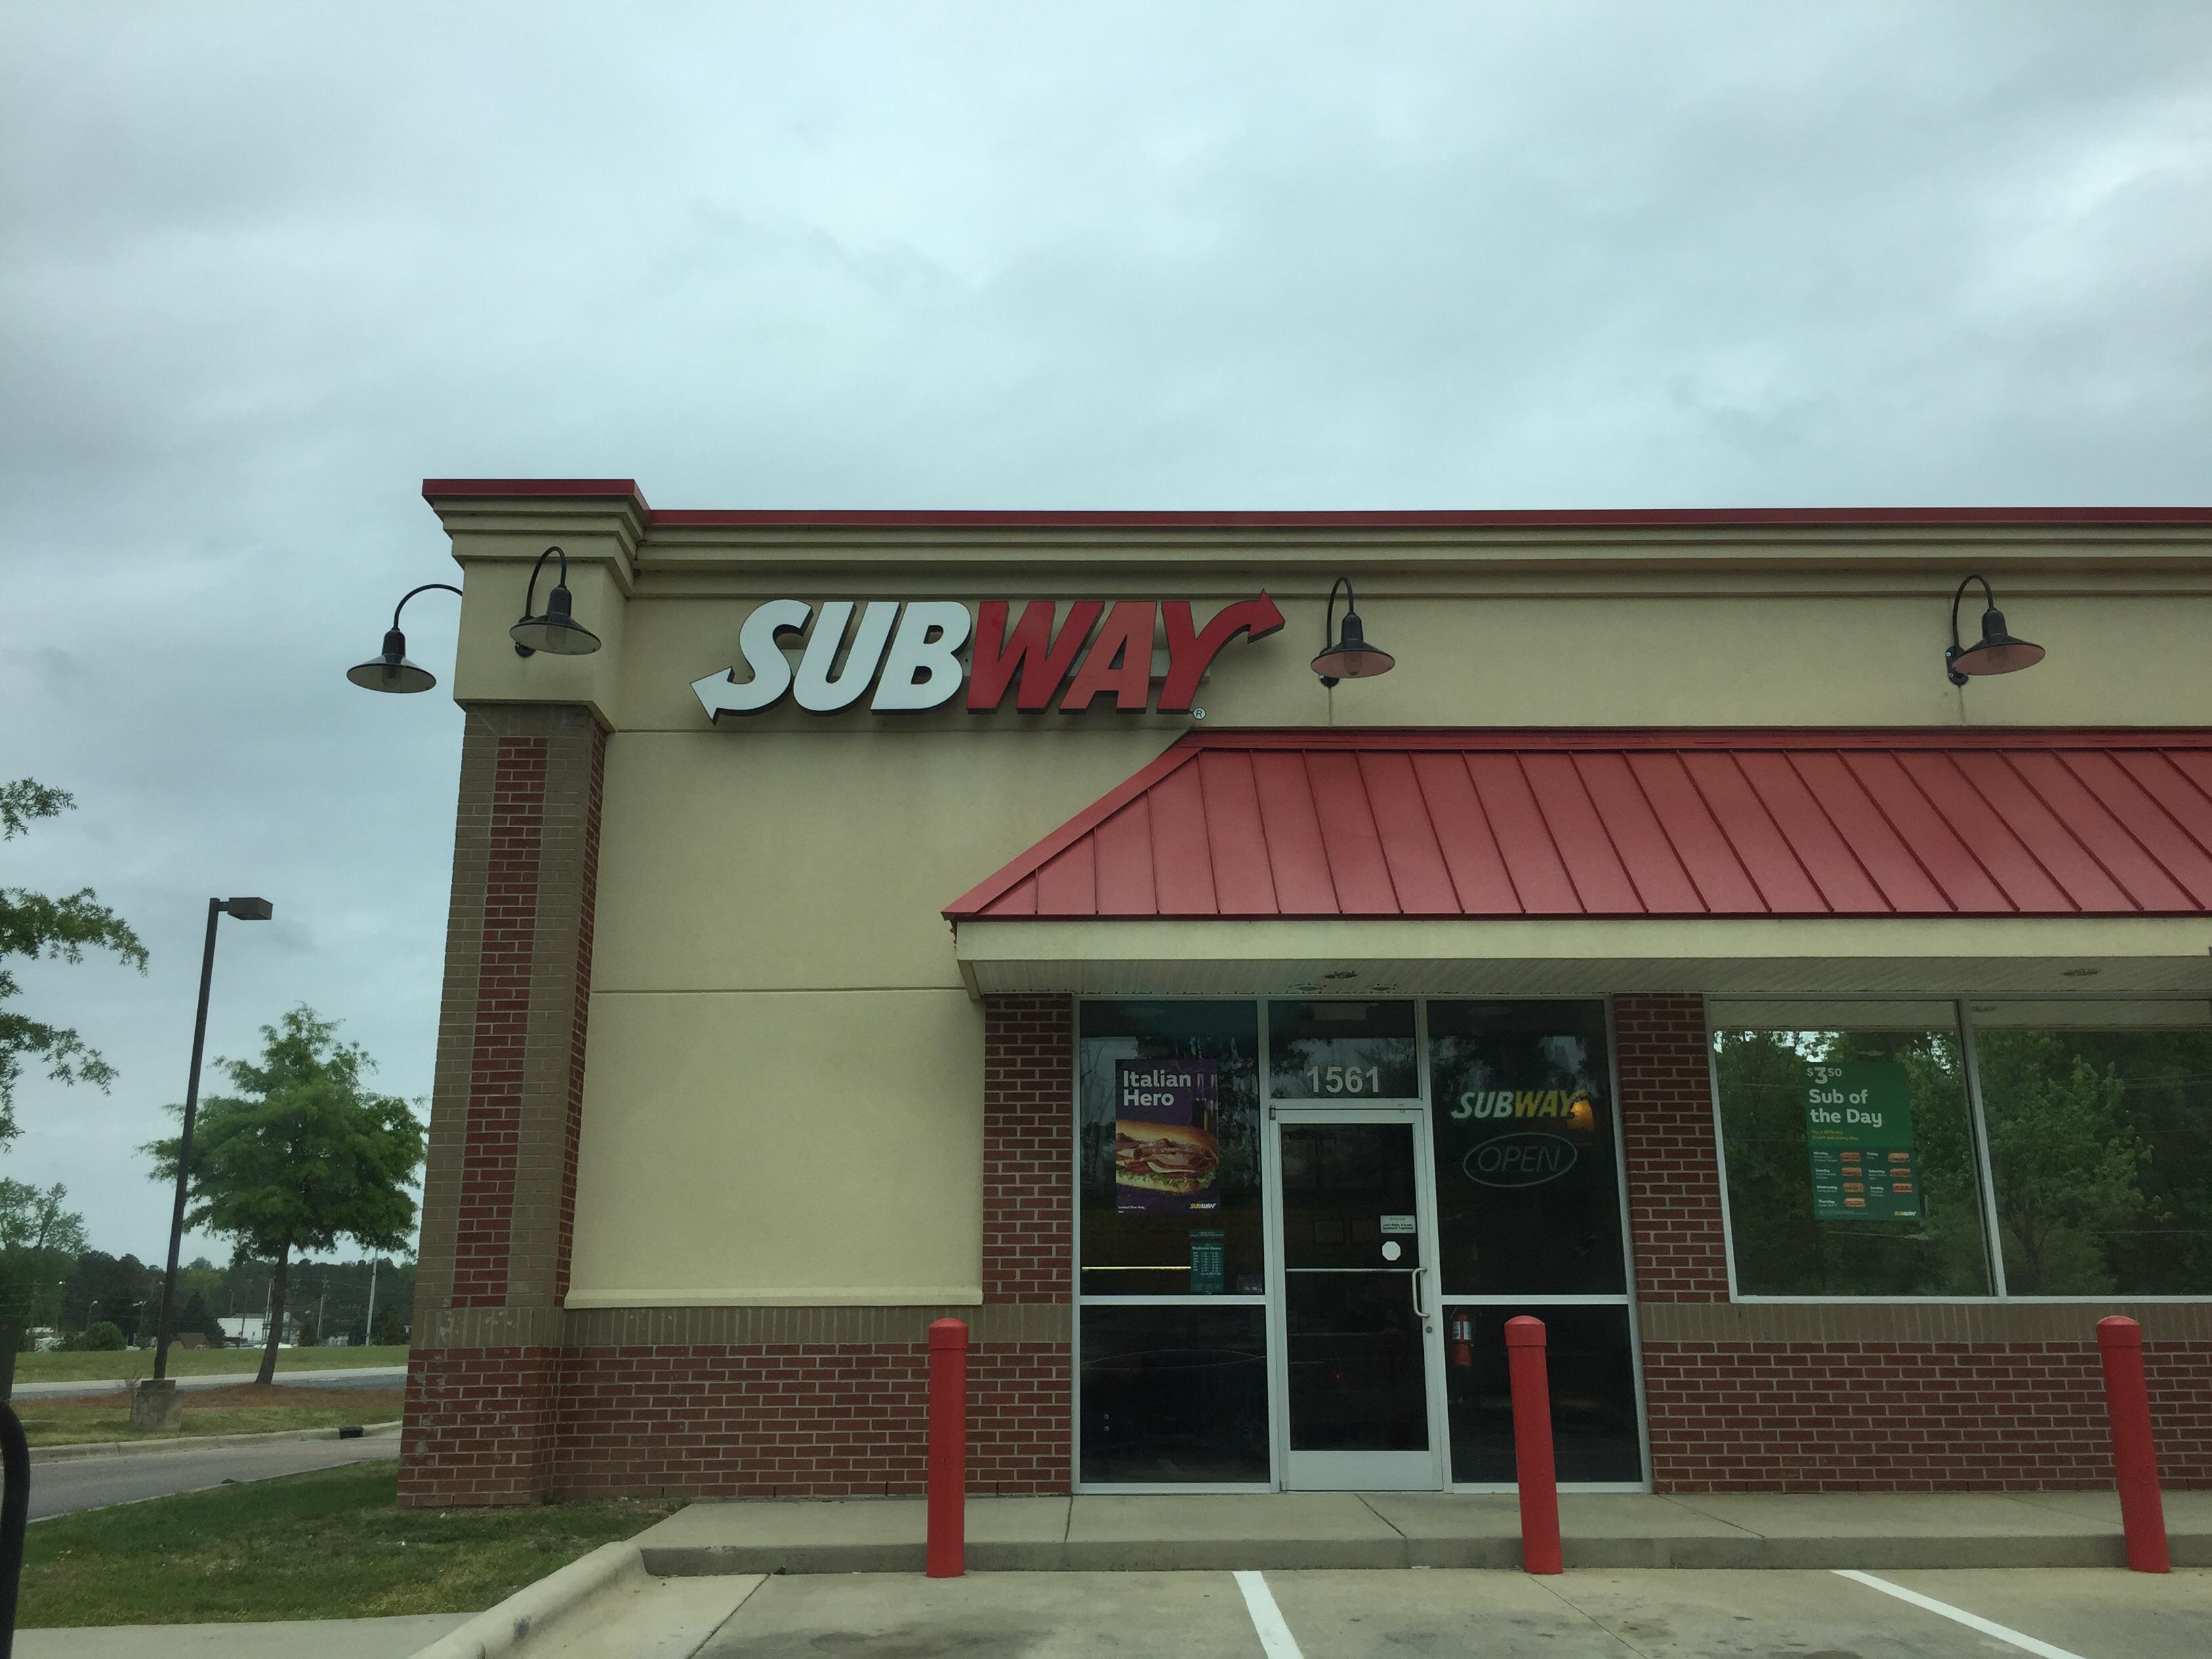 Red Subway Logo - Subway logo is white/red instead of yellow/green : mildlyinteresting